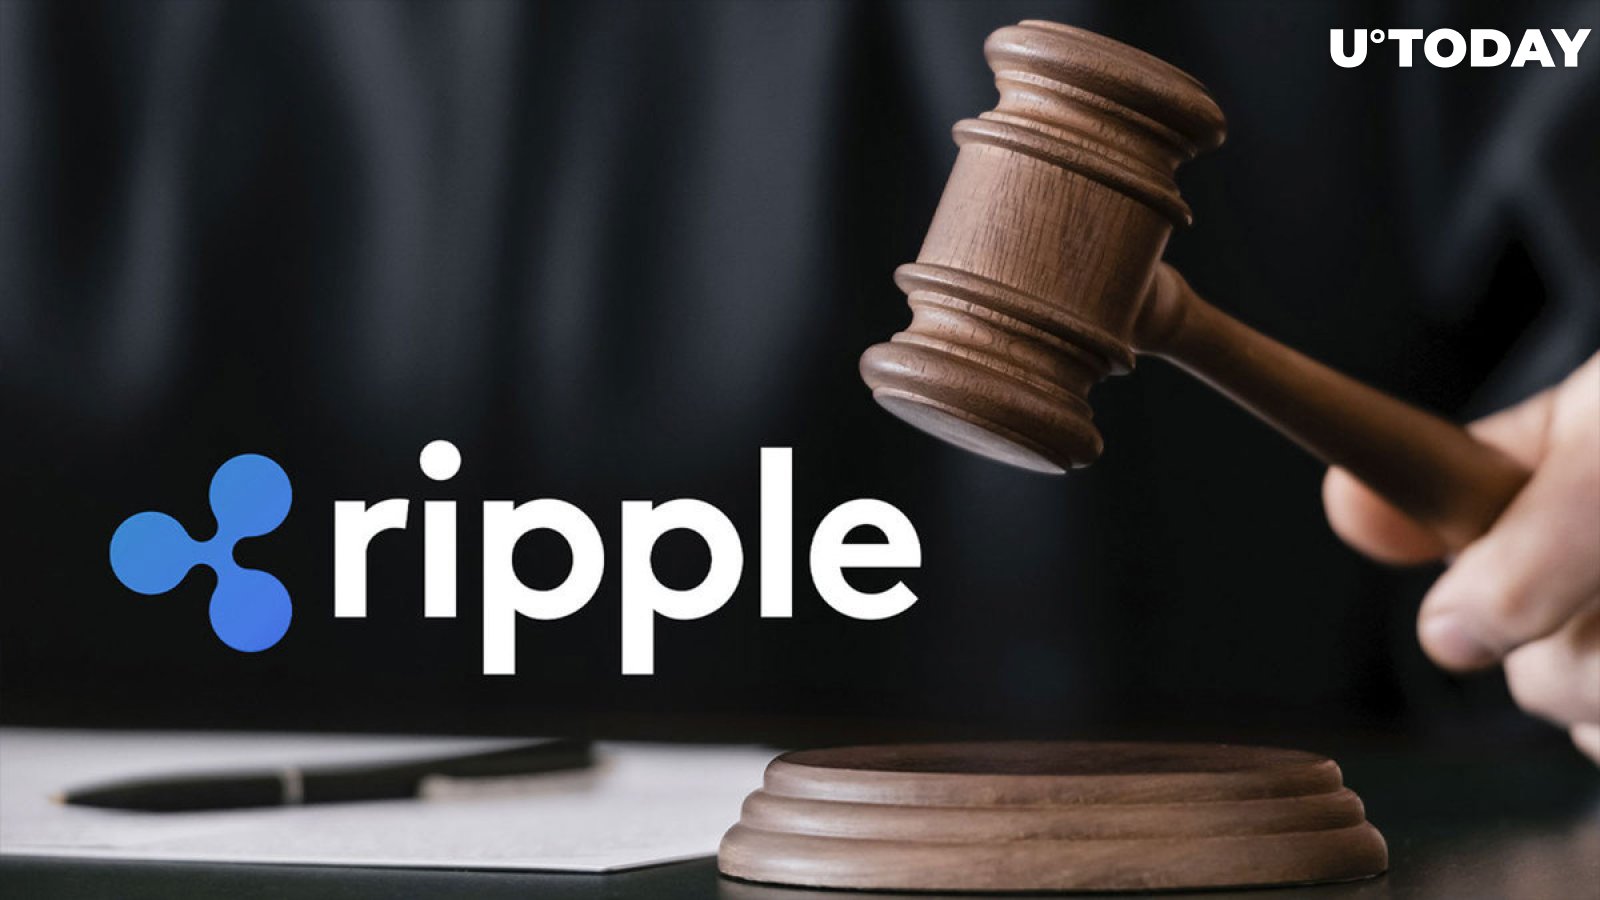 Were Ripple Executives Reckless? Crypto Lawyer Stirs up Striking Facts in Lawsuit